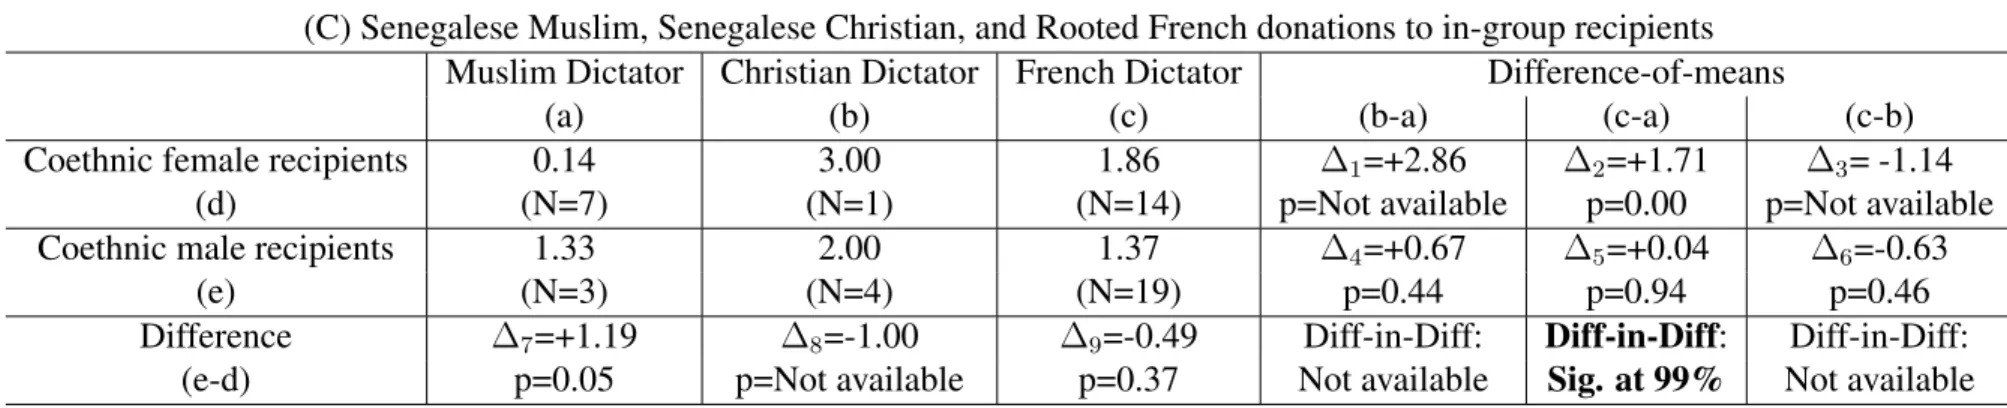 Table 2: Male dictator donations, difference-of-means analysis